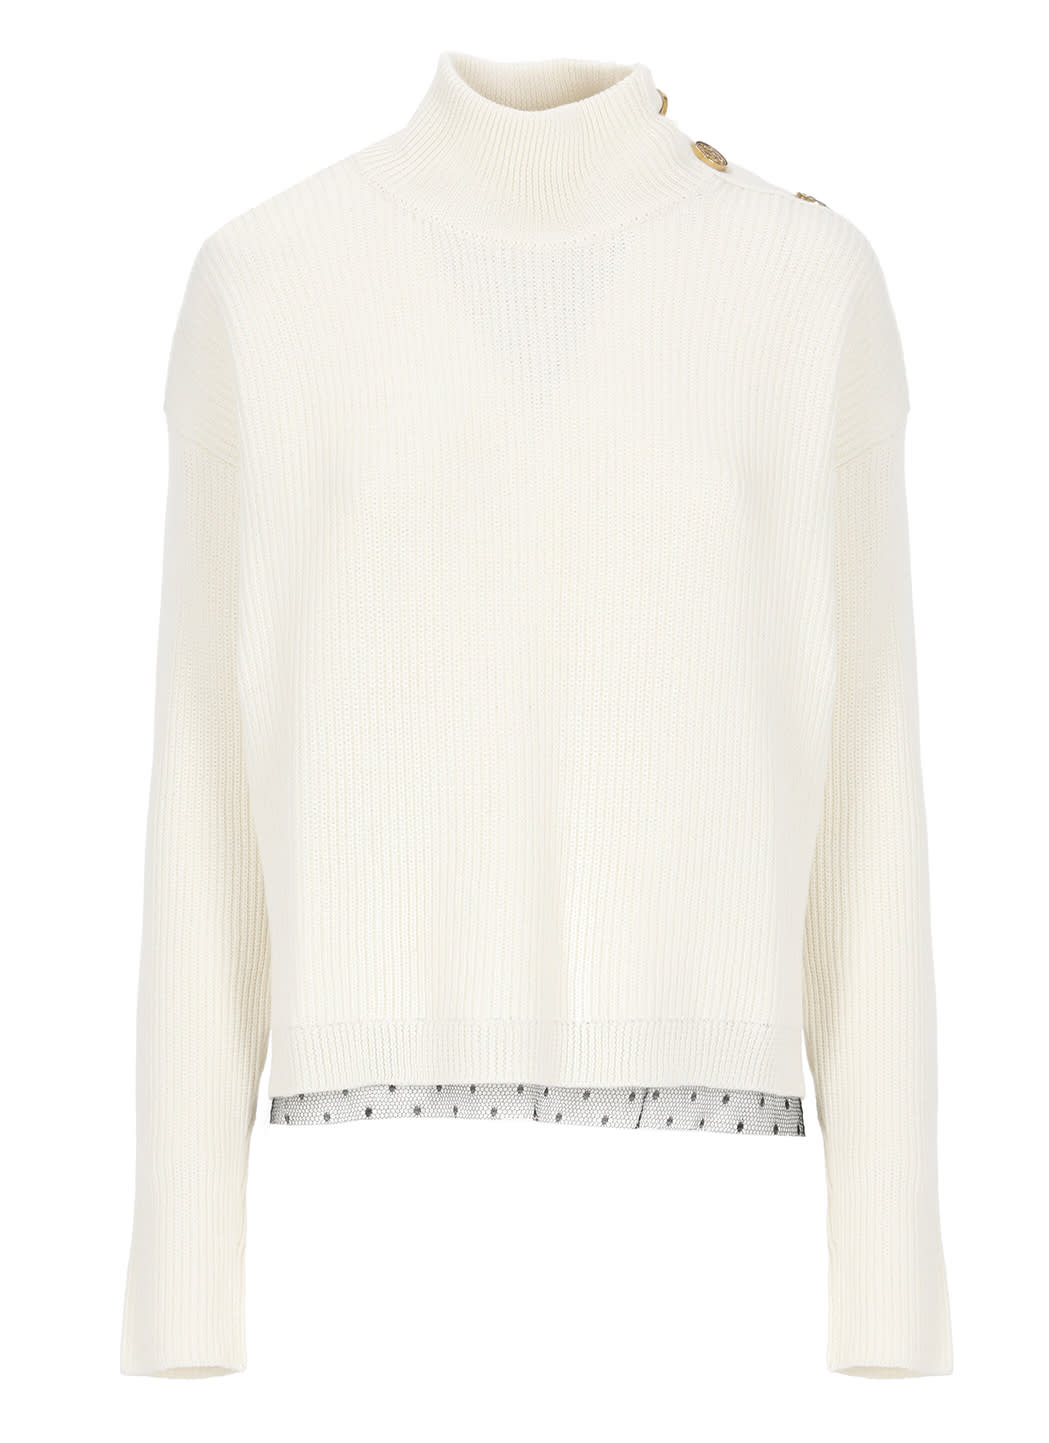 RED Valentino White Sweater With Buttons And Tulle Point Desprit